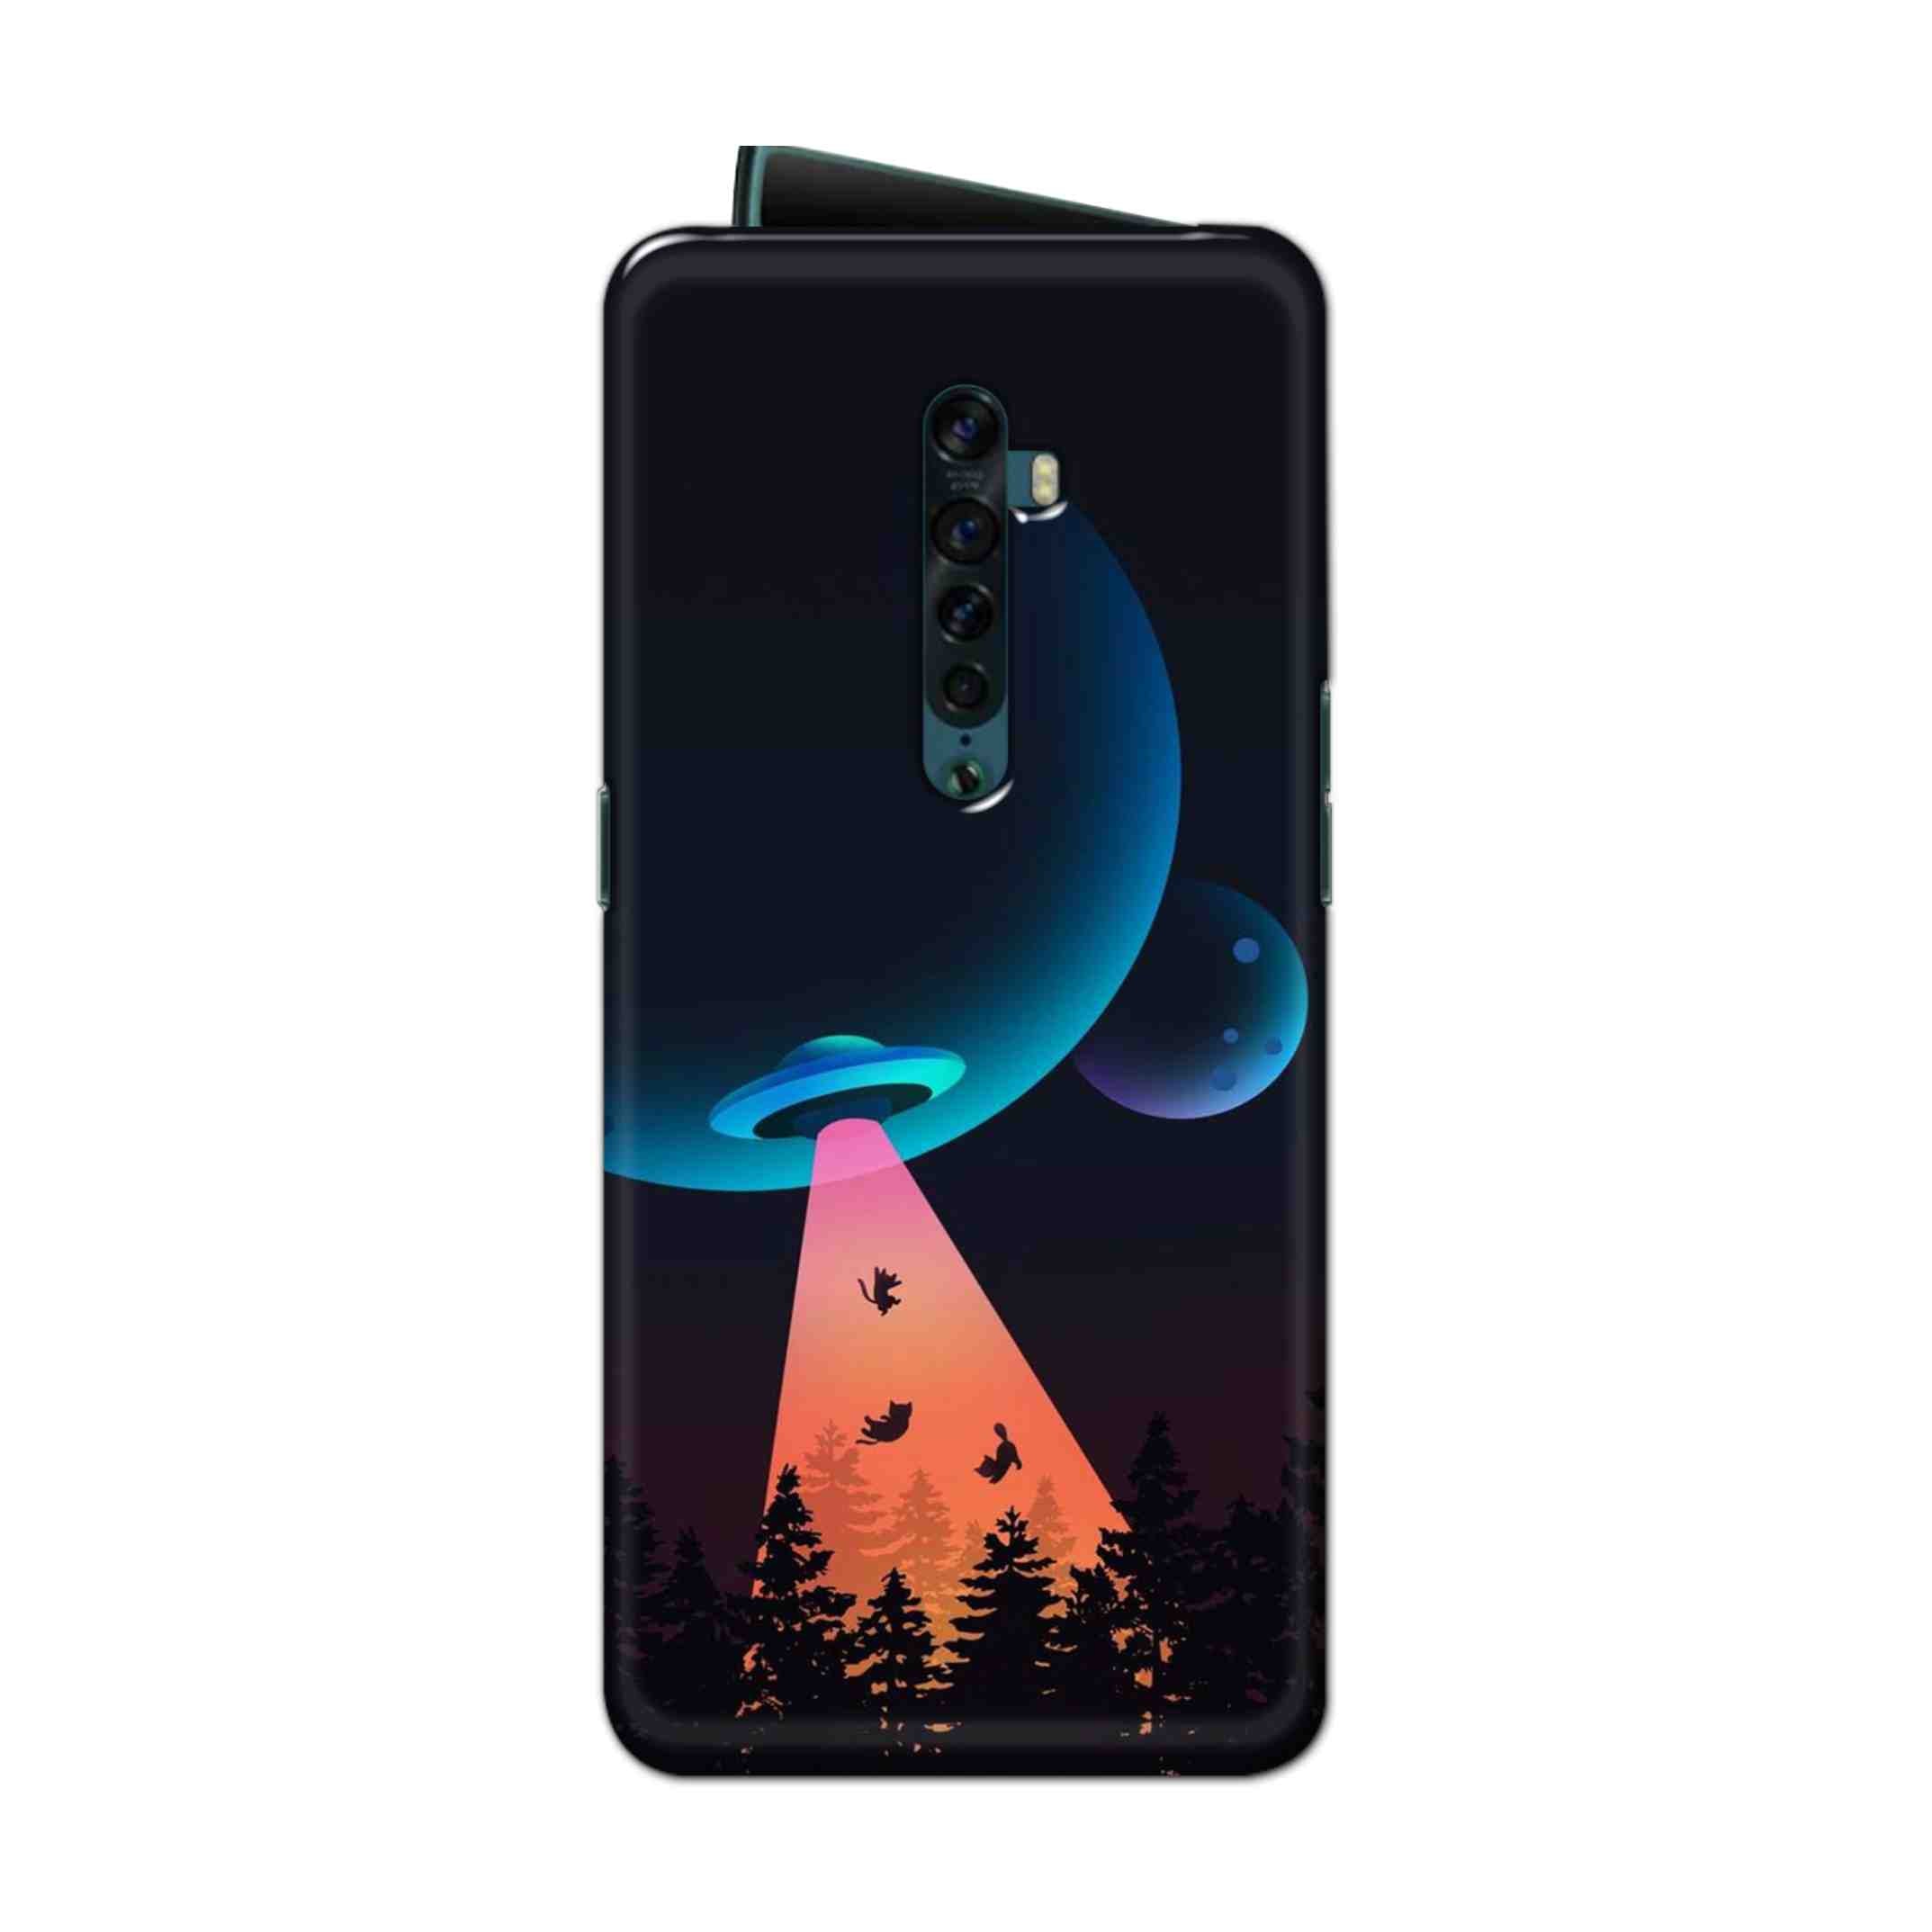 Buy Spaceship Hard Back Mobile Phone Case Cover For Oppo Reno 2 Online